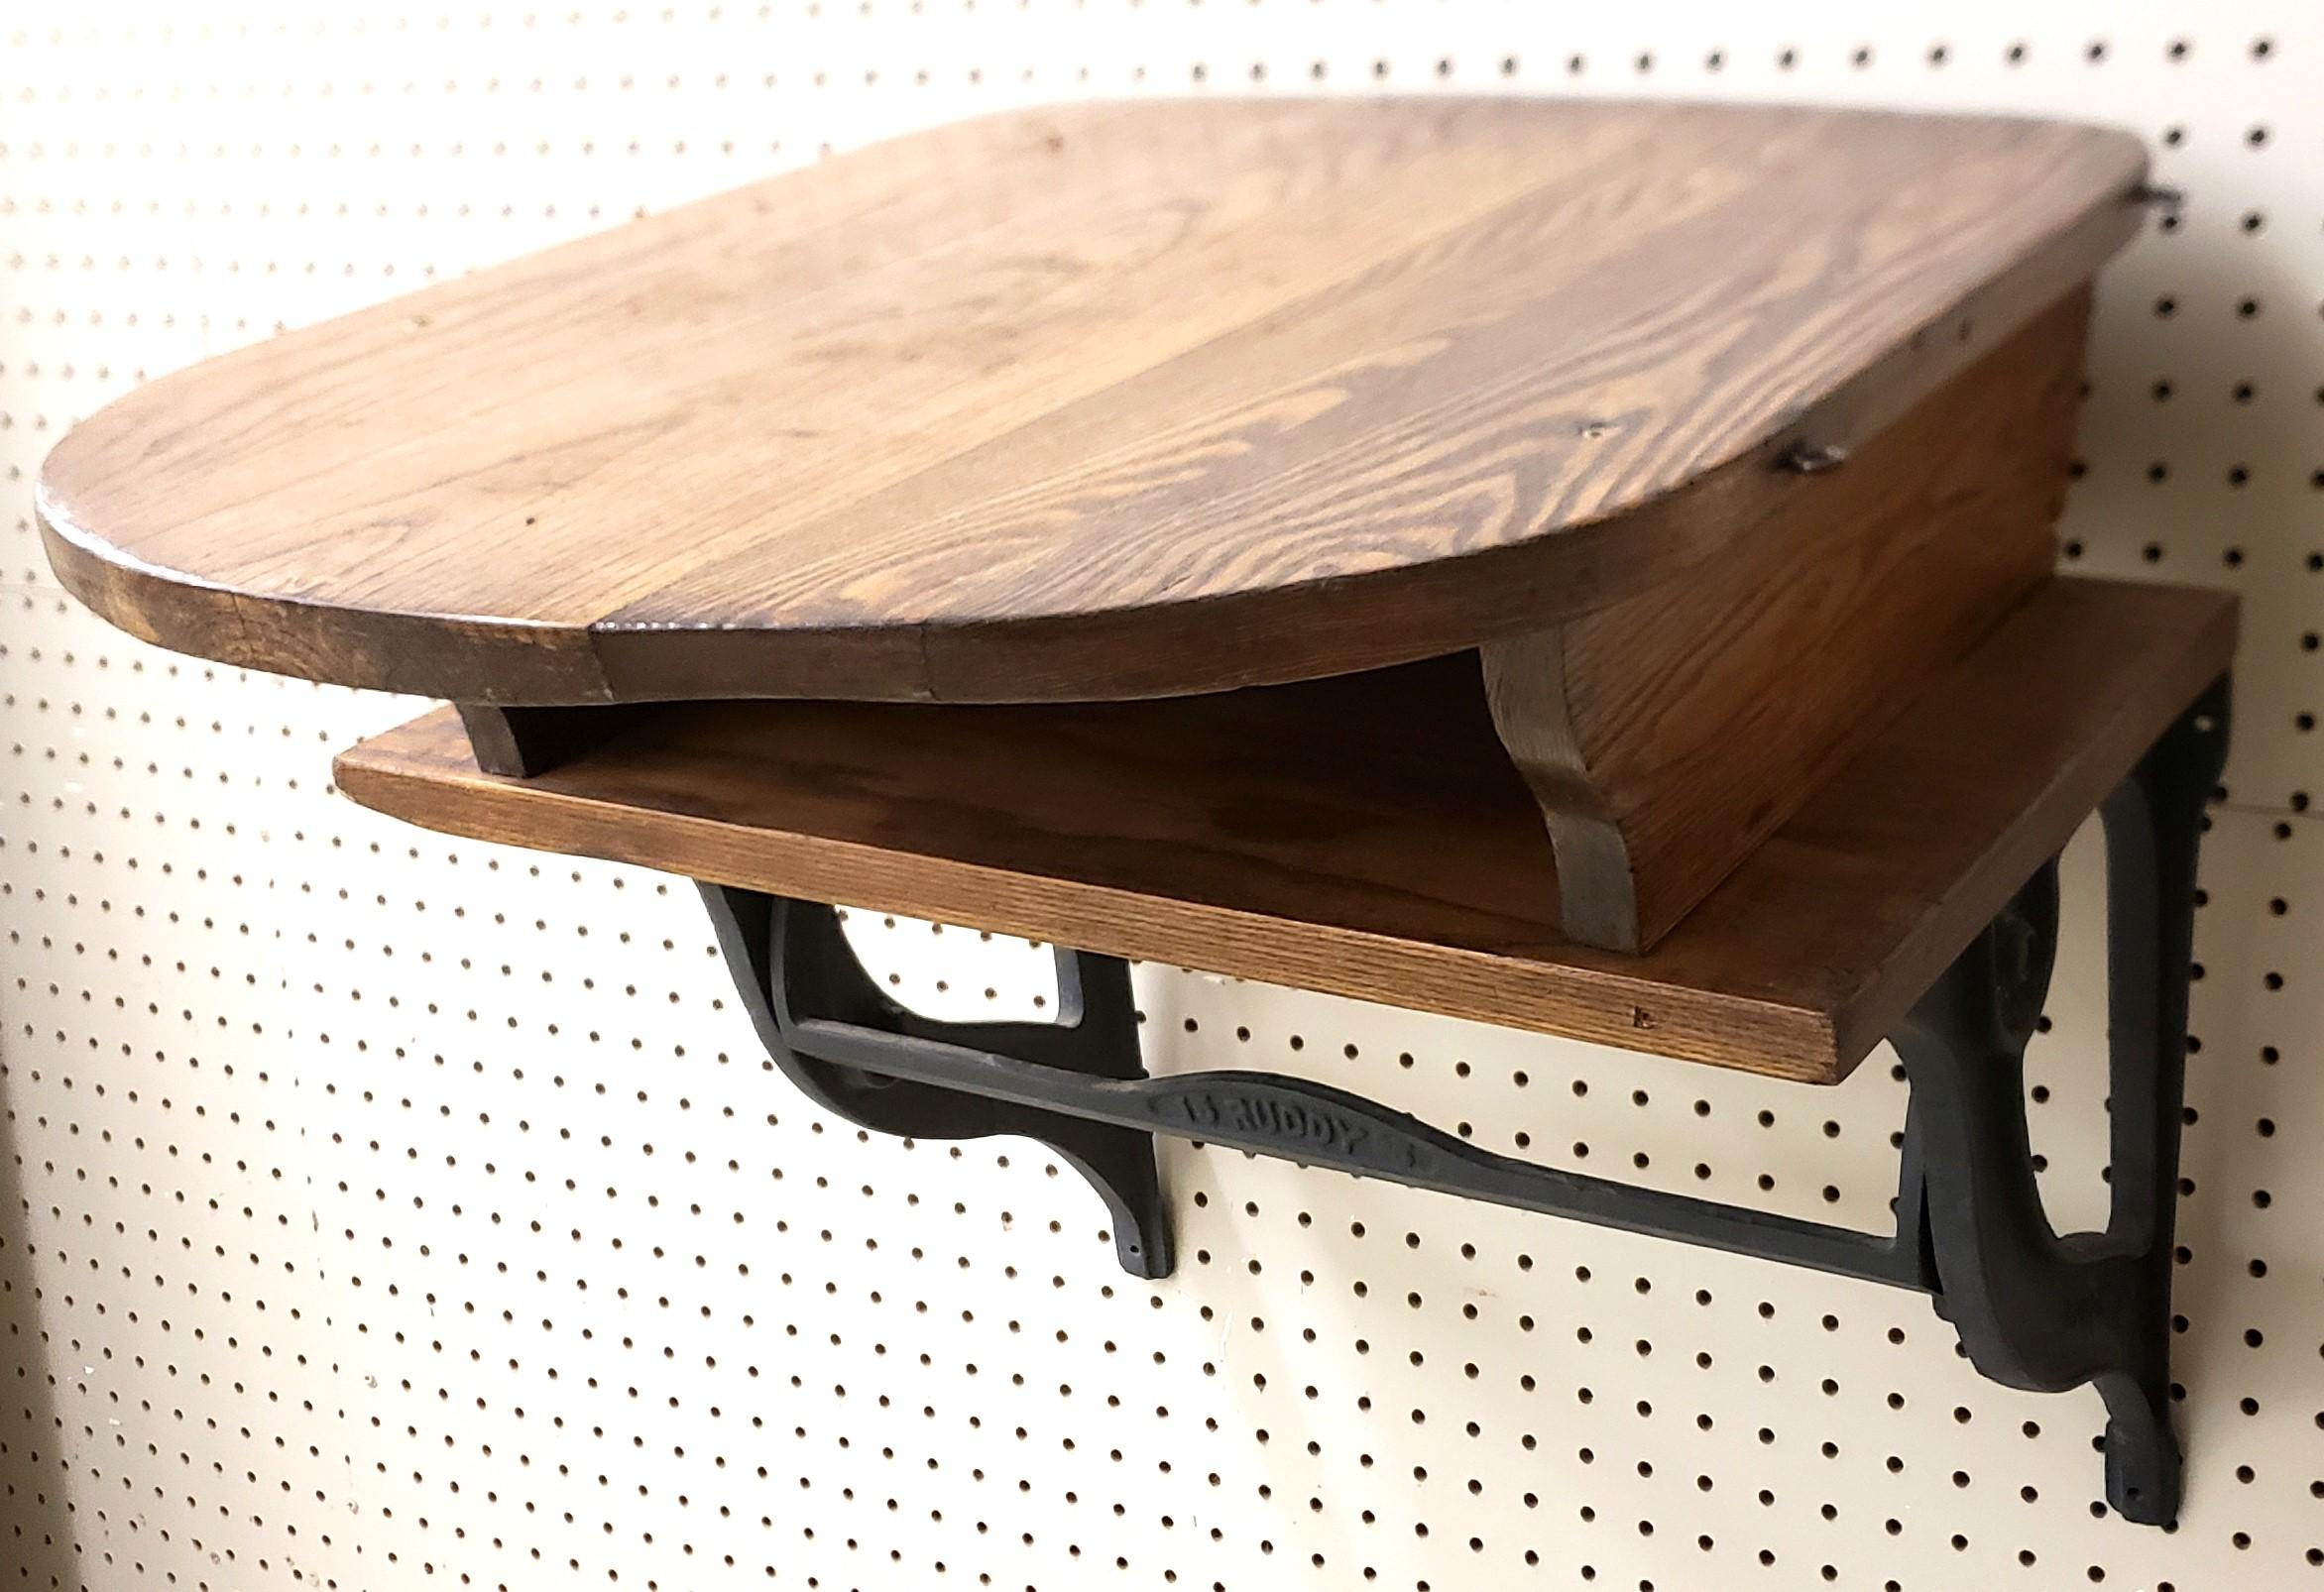 Antique Oak & Cast Metal Butcher Shop Mercantile Wrapping Wall Mounted Shelf In Good Condition For Sale In Hamilton, Ontario